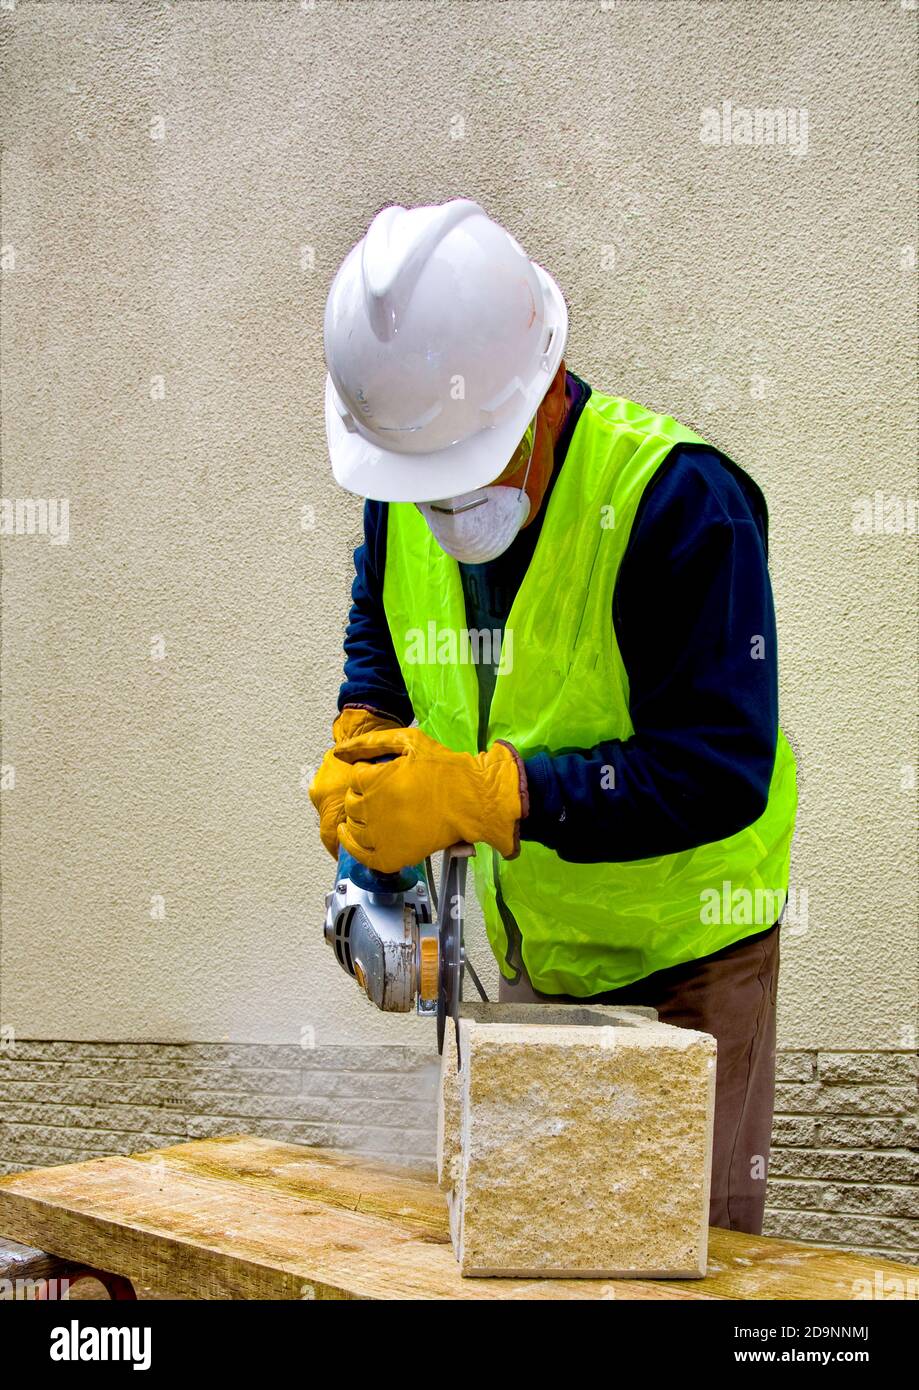 Australian building worker in safety gear using angle grinder in Canberra, the Australian national capital Stock Photo